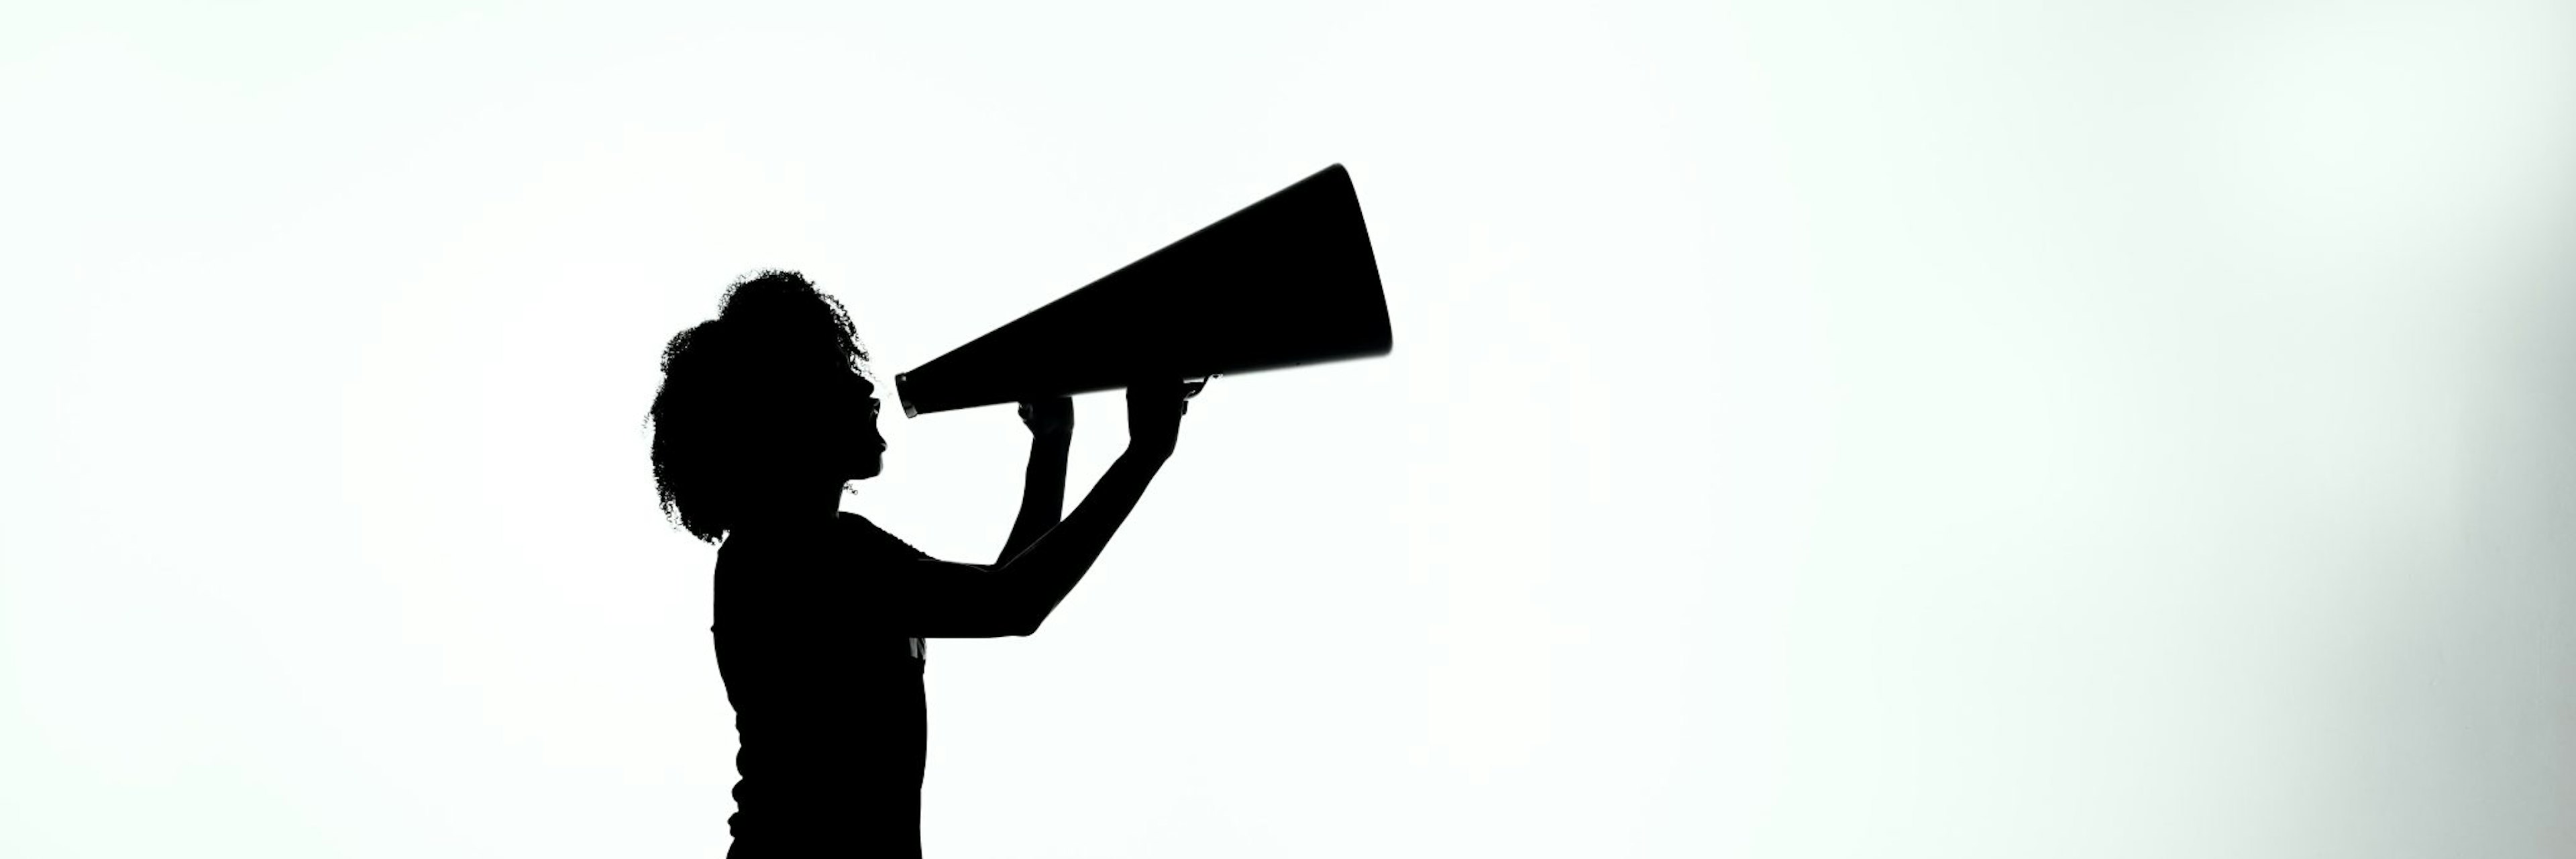 Silhouette of woman shouting into megaphone